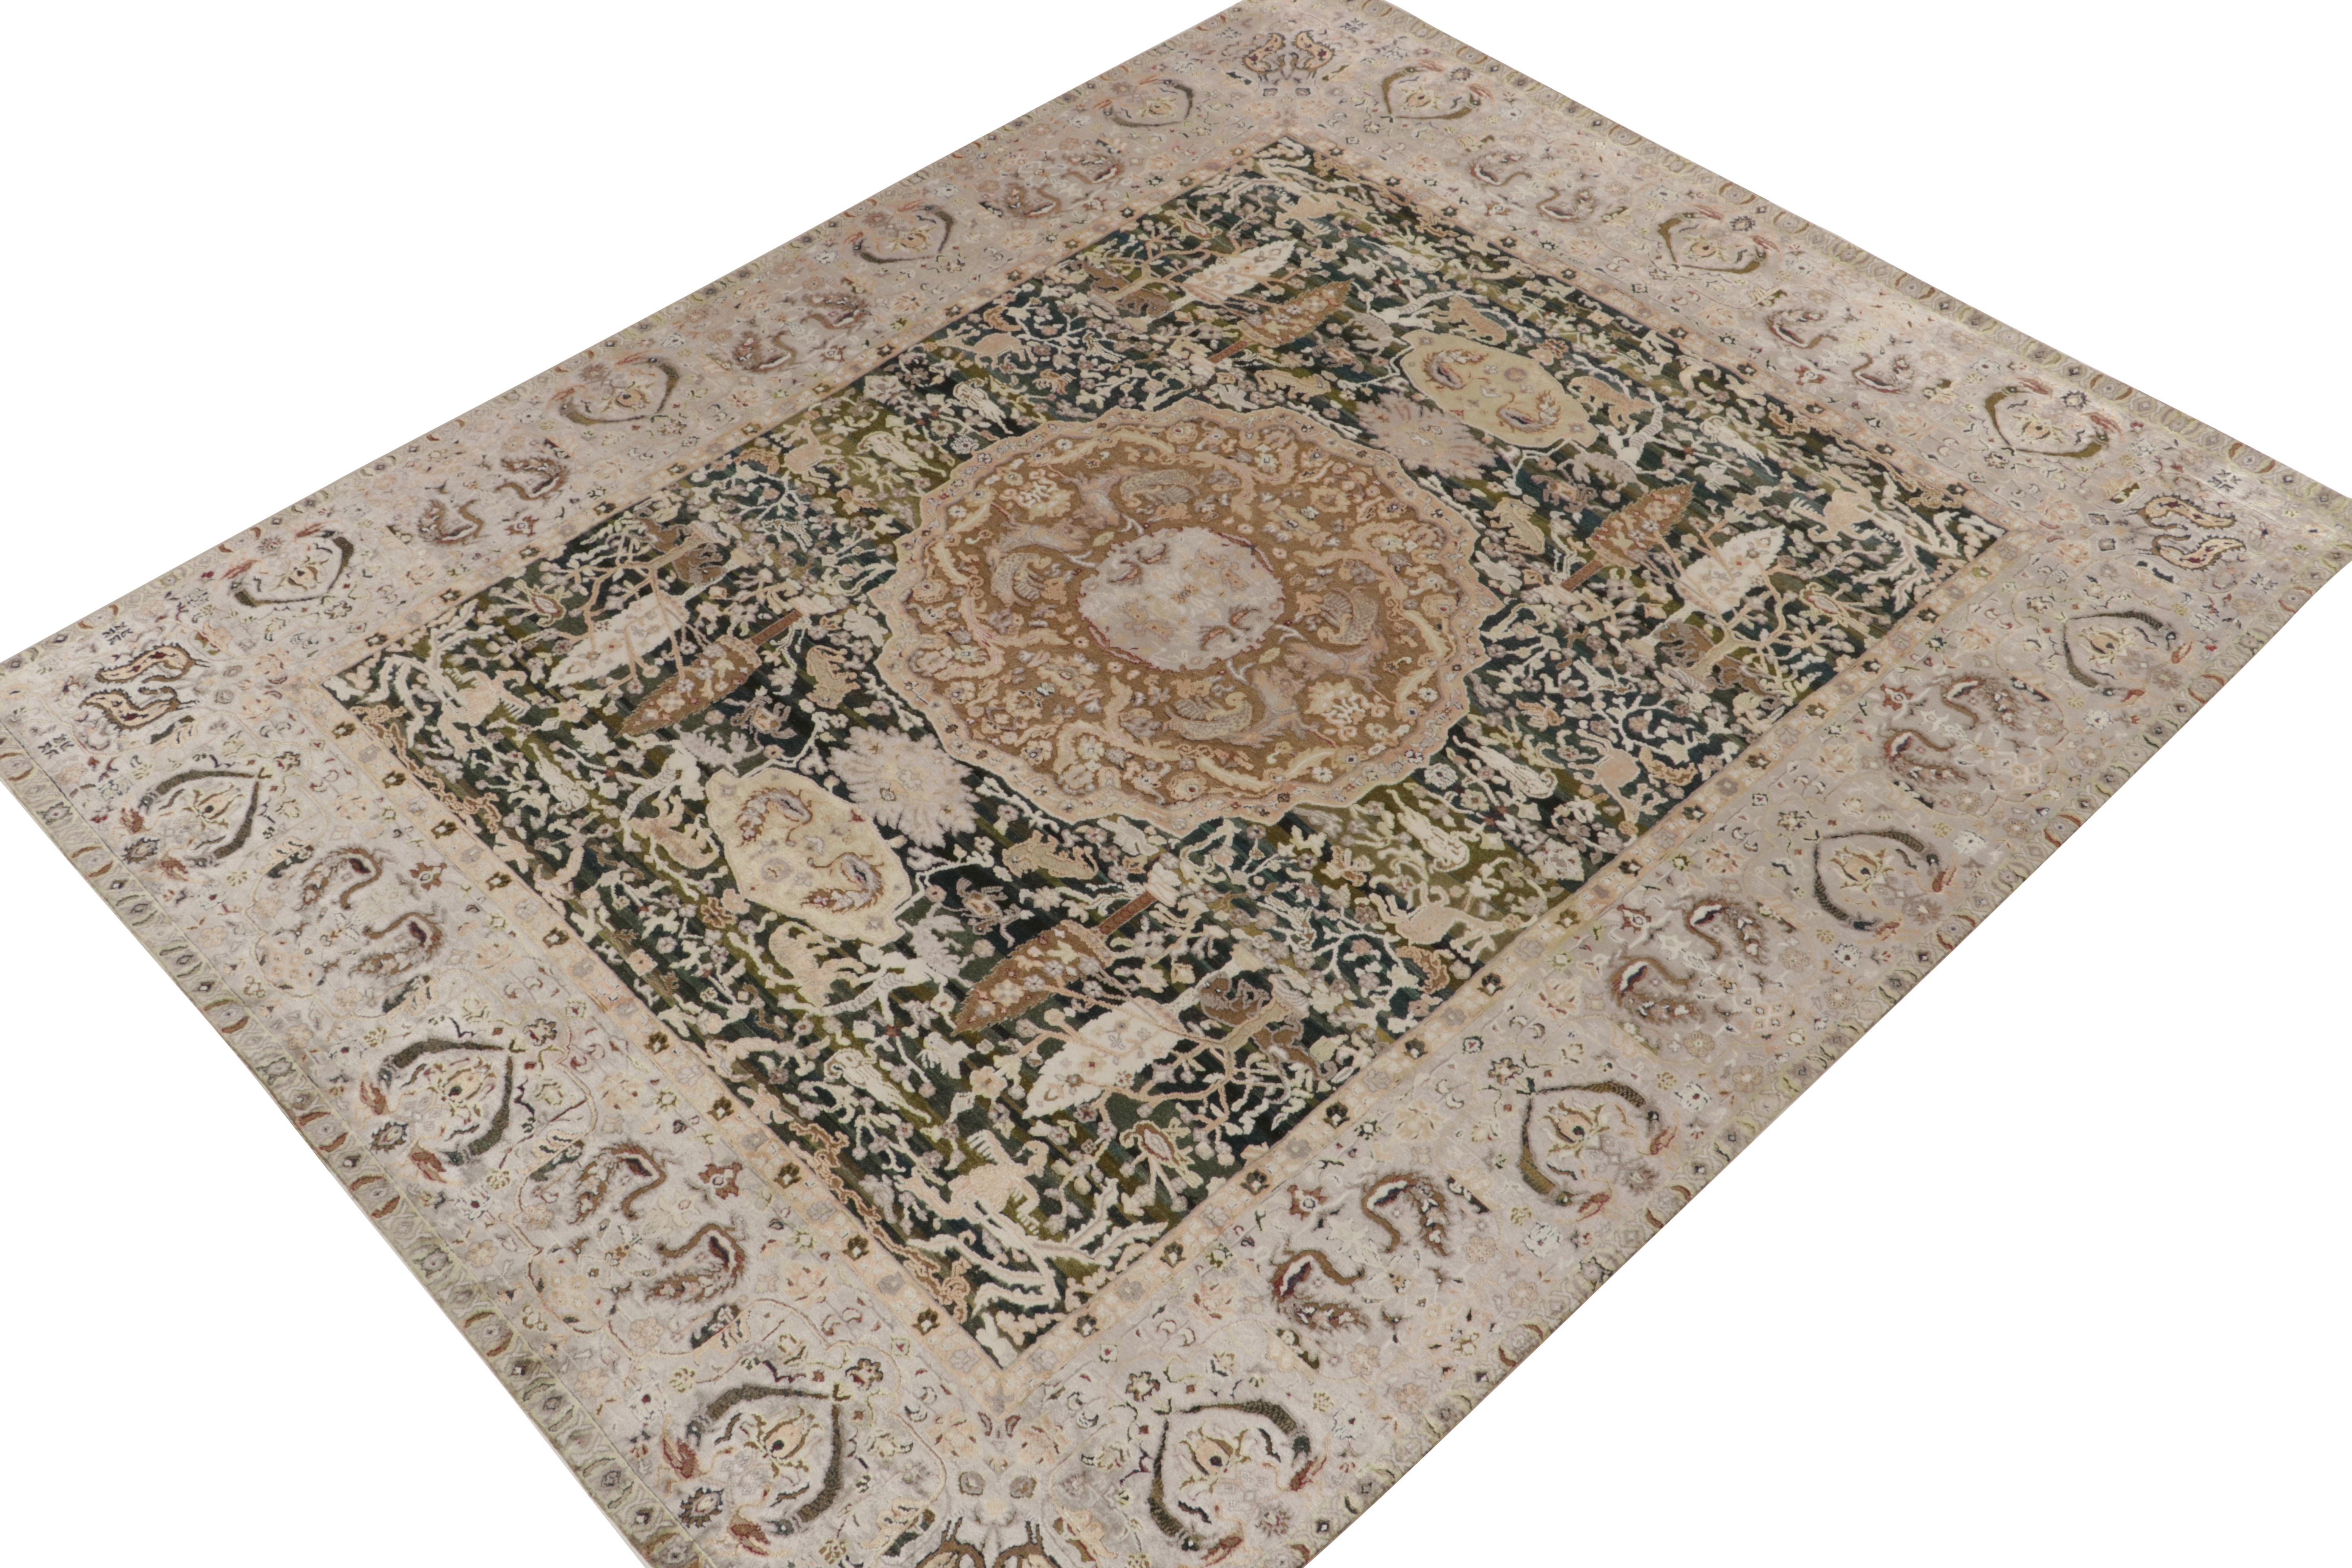 Hand knotted in fine quality wool & silk, a gorgeous circle rug inspired by 19th century Persian masterpieces of rare provenance.
New to our Modern Classics collection, this particular work is believed to have been initiated by a German designer in